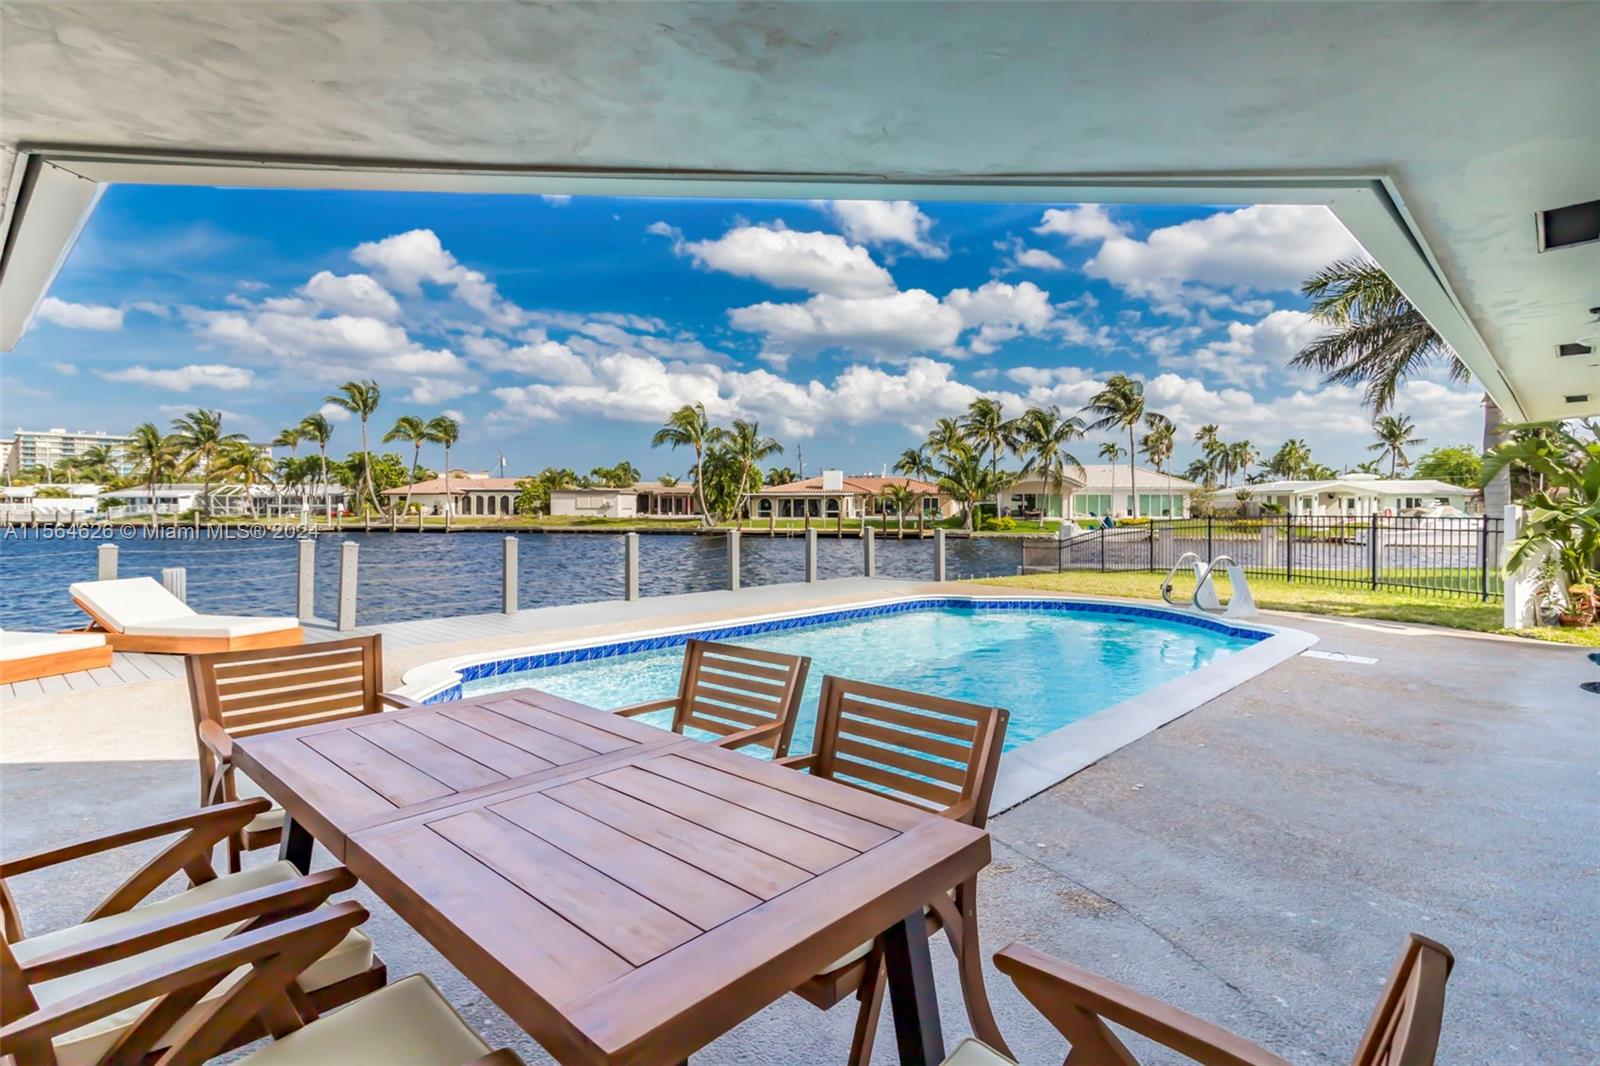 Tastefully renovated Waterfront Home on a canal in Pompano Beach with expansive Water Views, 110 feet of Water-Frontage, Pool, Dock, Sun Deck, 2-Car Garage, New Floors, New Roof (2020), updated Electrical, and Plumbing. Featuring 3 Bedrooms, 3 Bathrooms, and a waterfront Primary Bedroom.  Open Kitchen with a modern design, Quartz Countertops and Stainless Steel Appliances.  Large Backyard with Waterfront Swimming Pool and Sundeck, perfect for entertaining and relaxing.  Only one fixed bridge at Federal Highway.